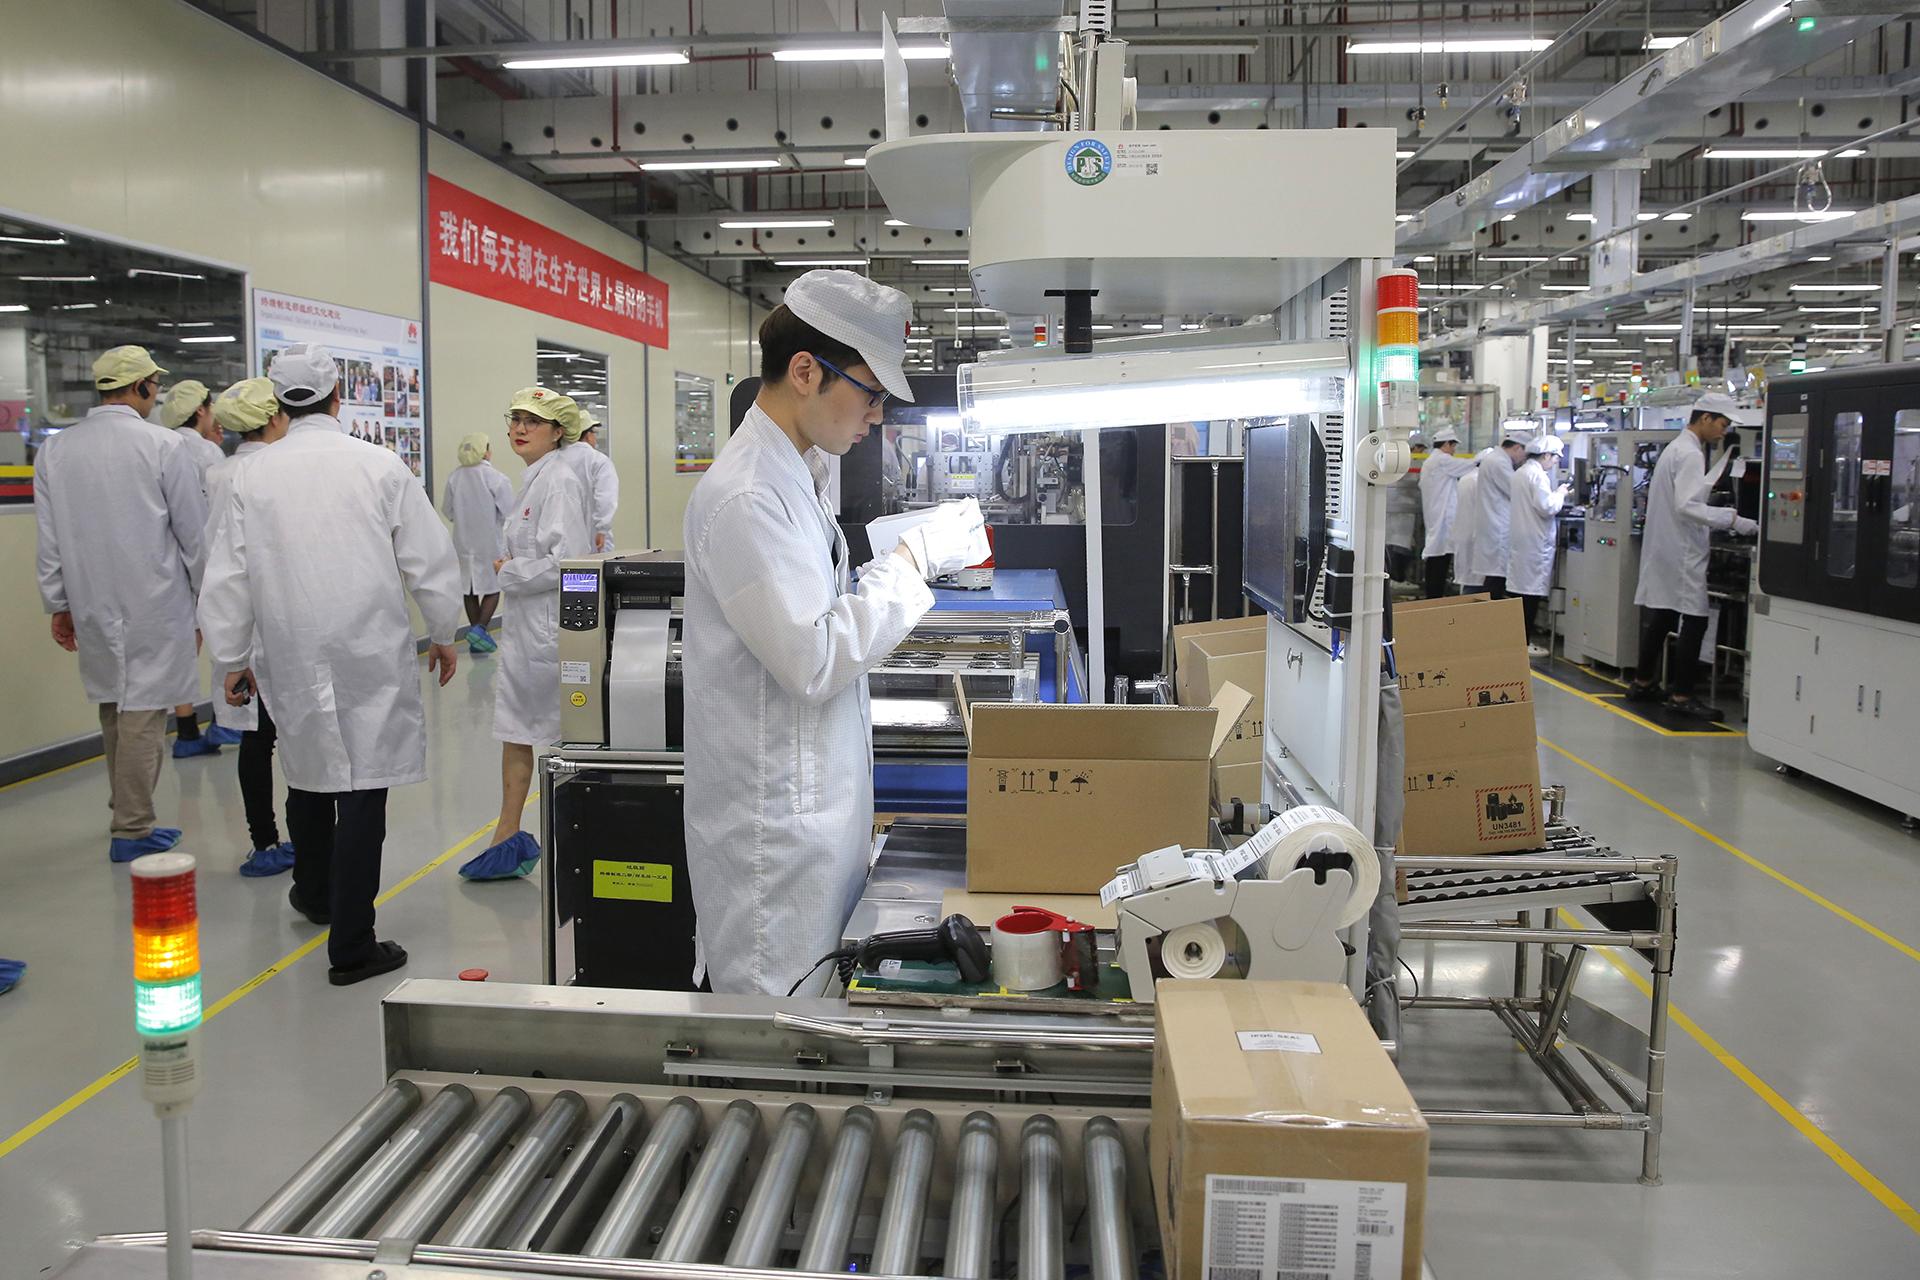  In this March 6, 2019, file photo a staff member works on a mobile phone production line during a media tour in Huawei factory in Dongguan, China’s Guangdong province. Huawei Technologies Co. is one of the world’s biggest supplier of telecommunications equipment. (AP Photo / Kin Cheung, File)